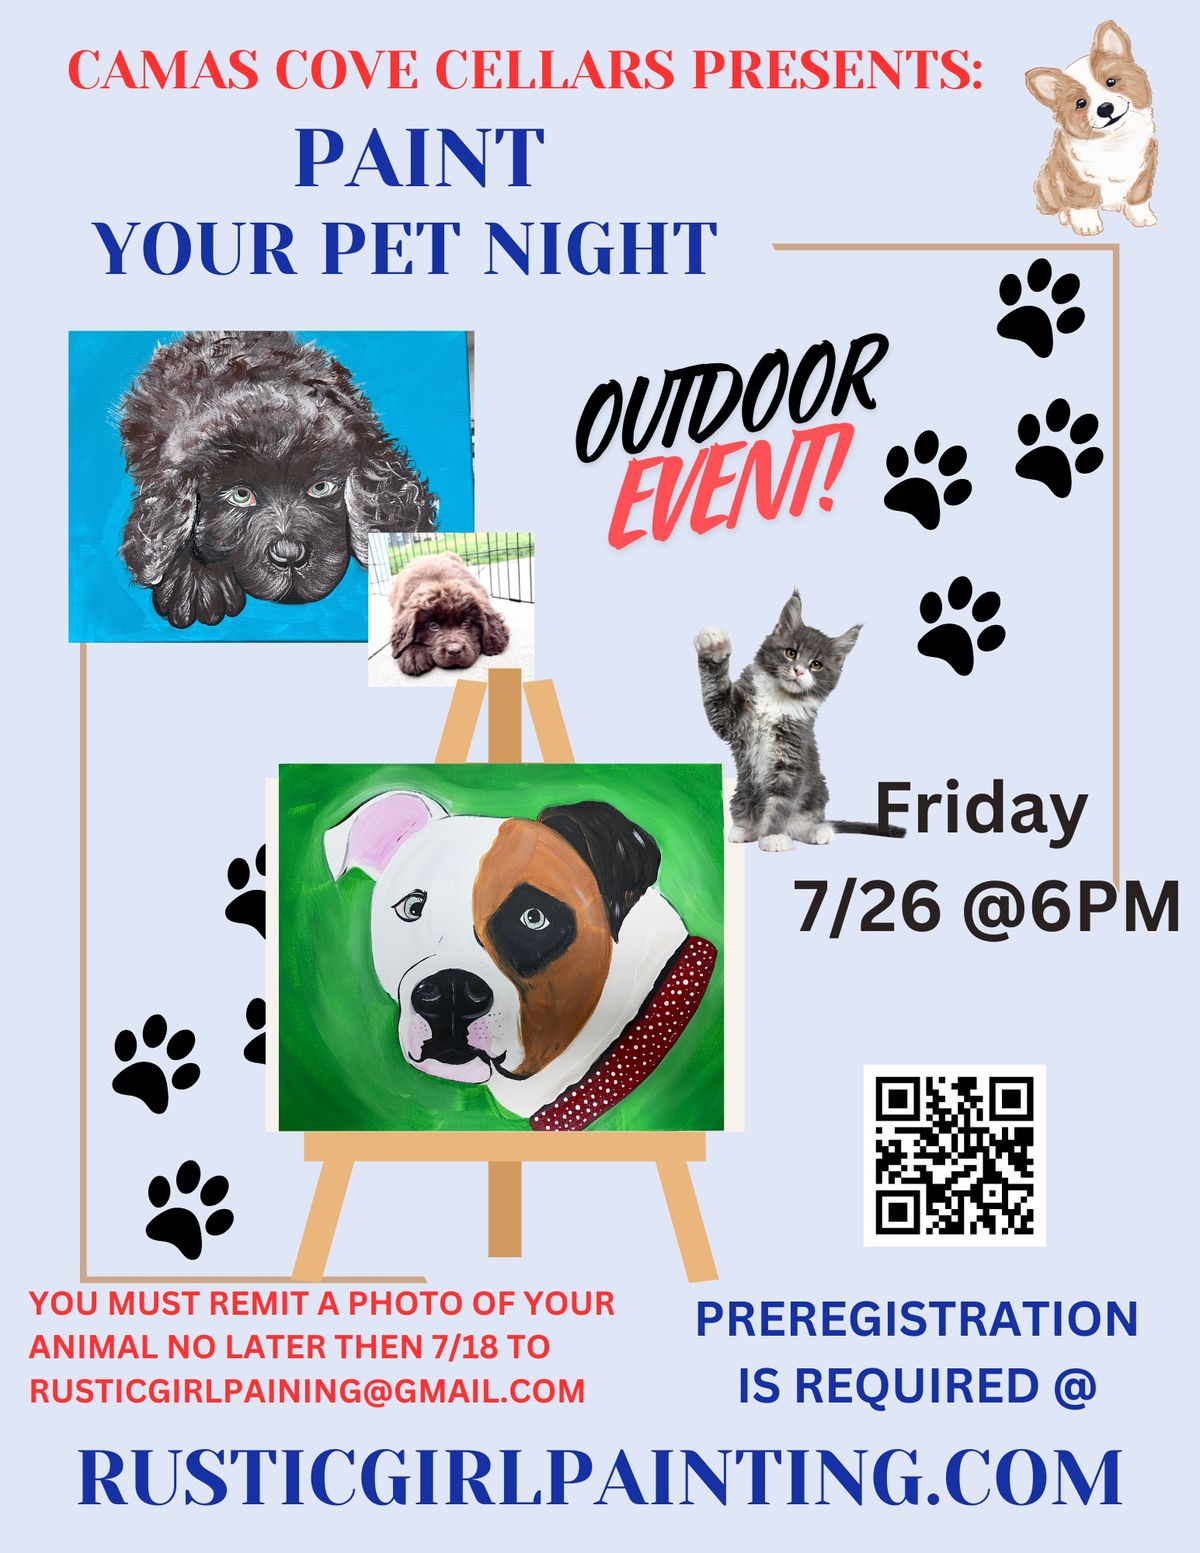 Paint your Pet Sip and Paint, outdoor event @Camas Cove Cellars